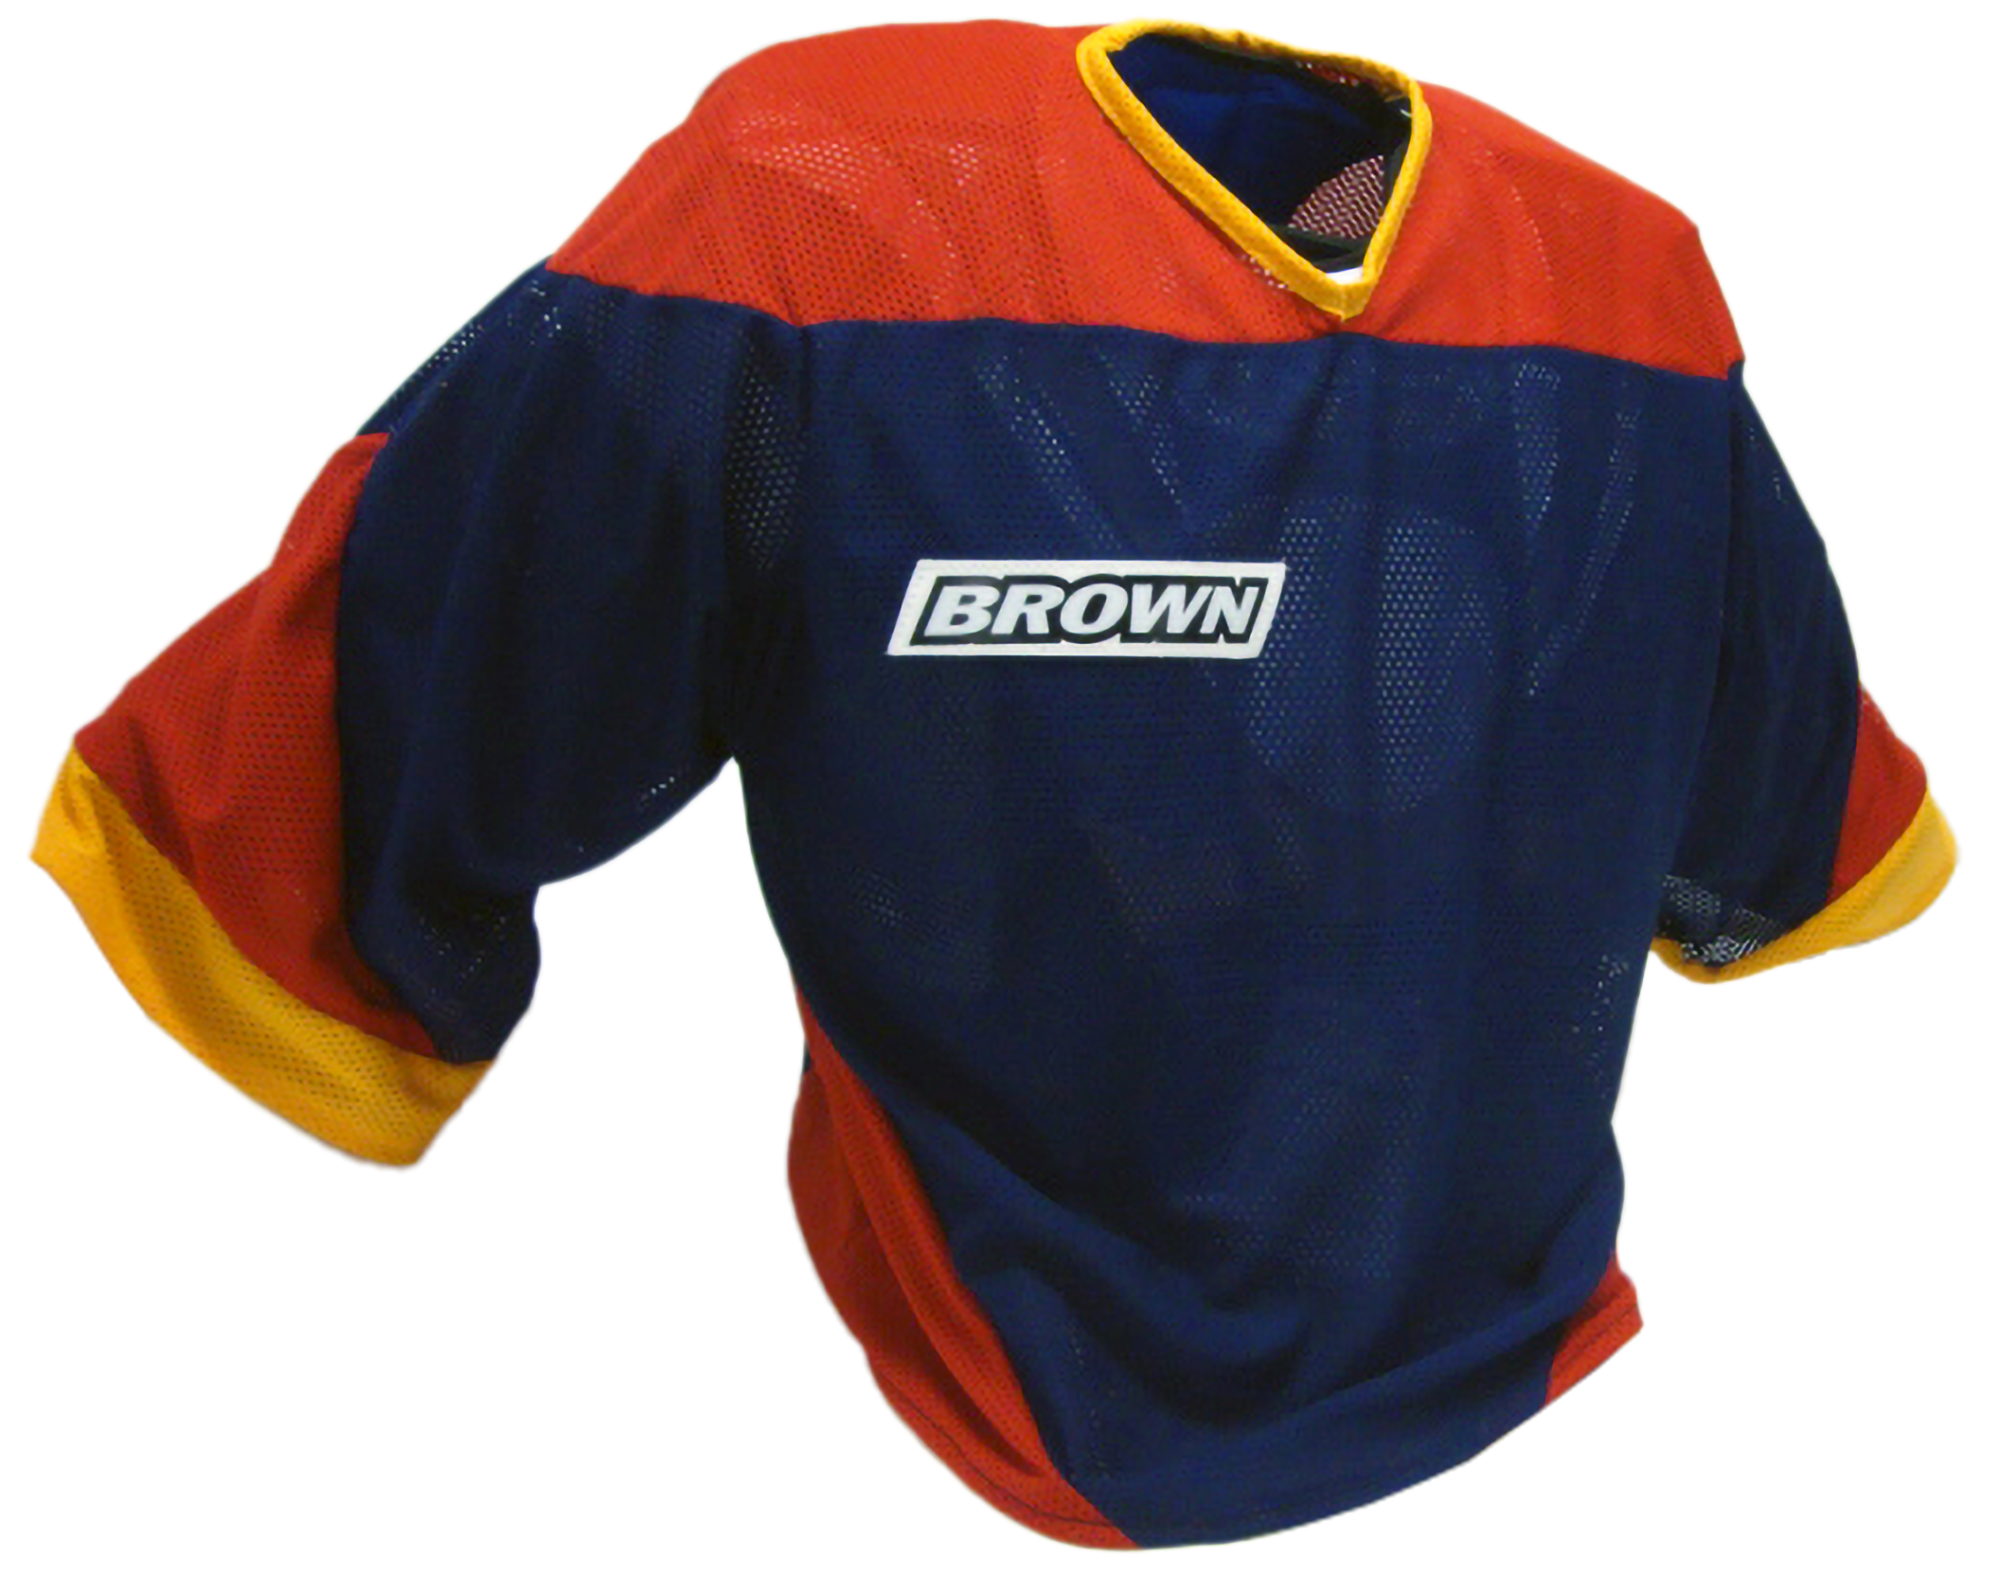 Blue, red and yellow jersey